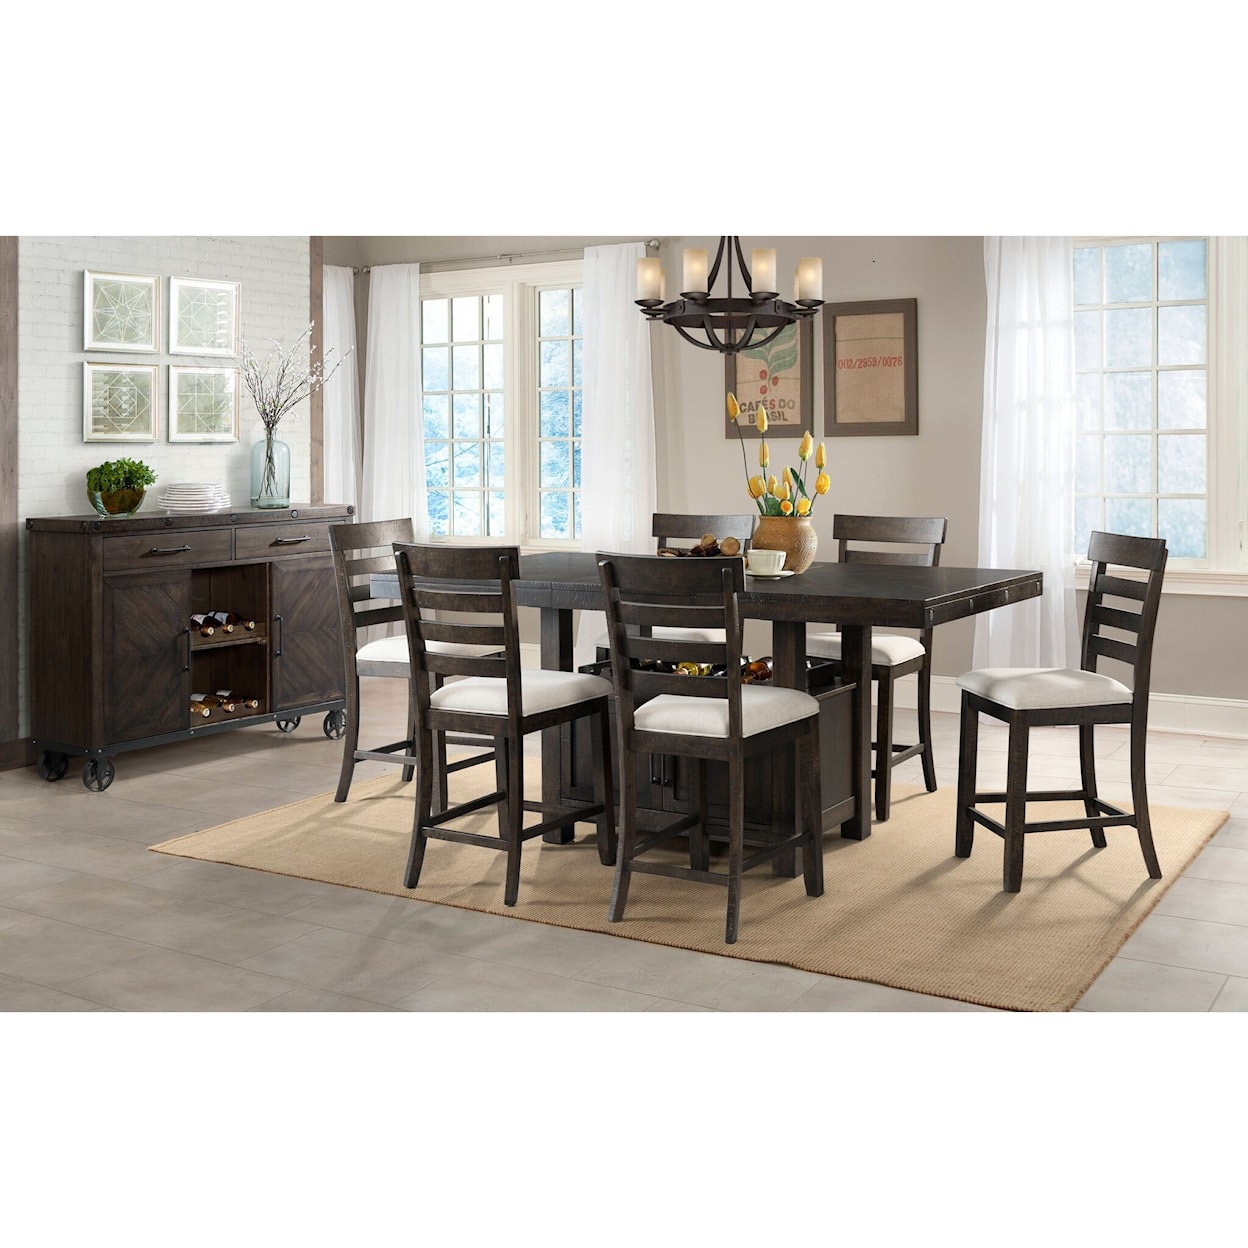 Elements International Colorado Counter Height Table